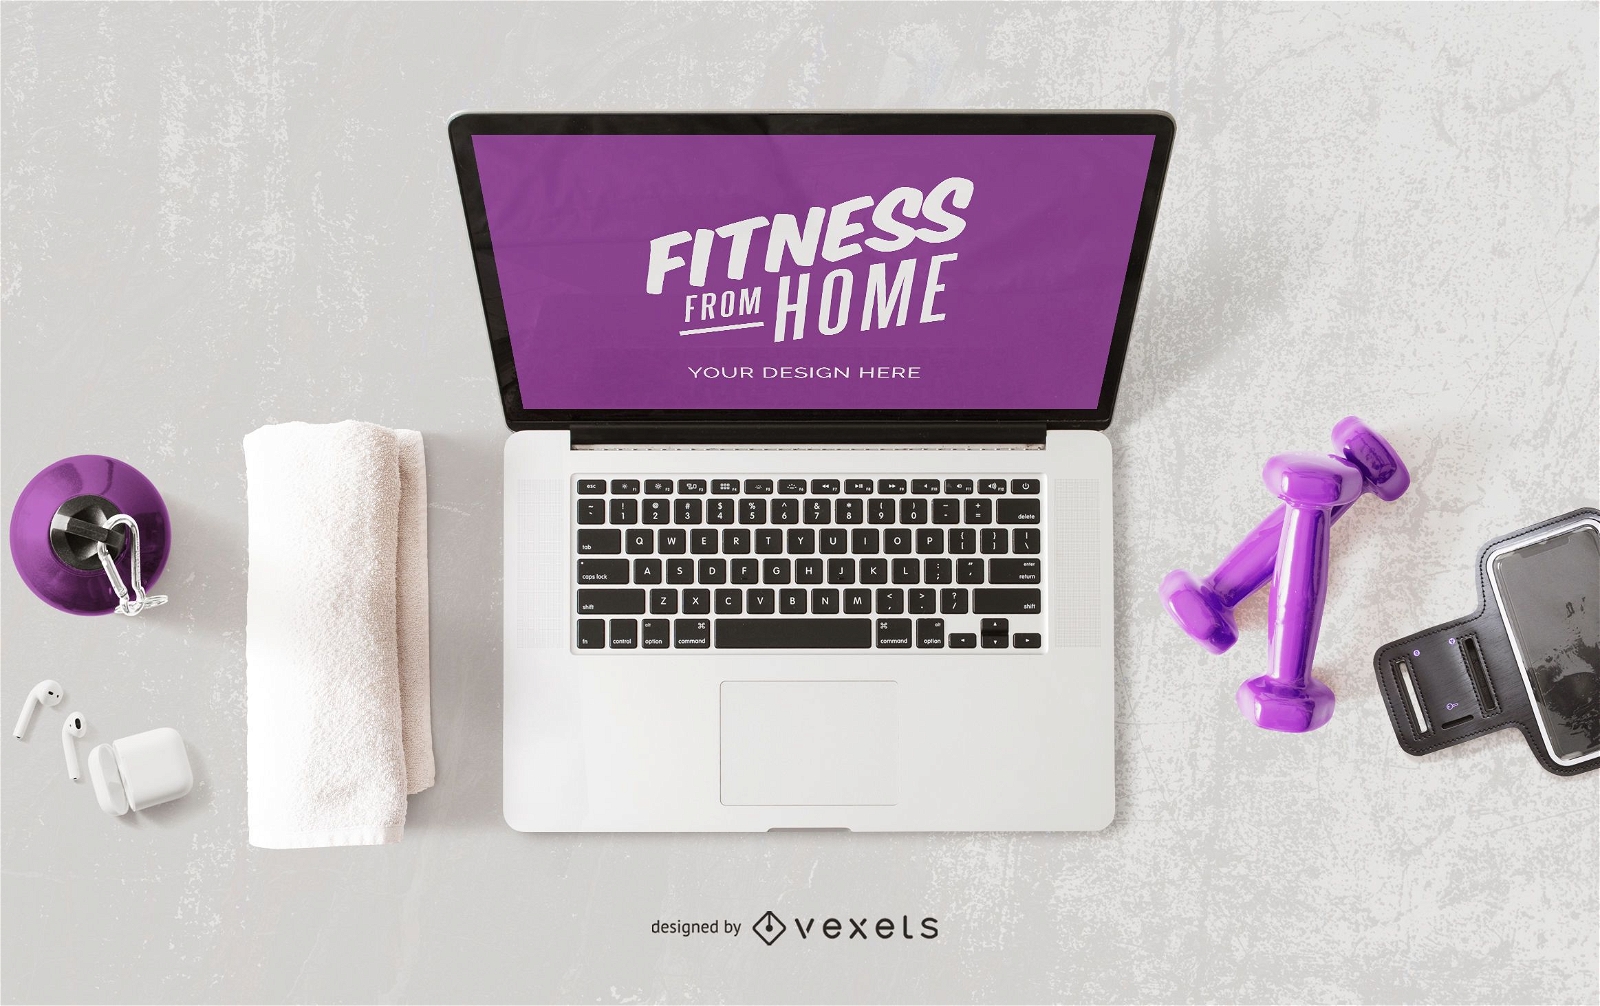 Fitness from home computer mockup